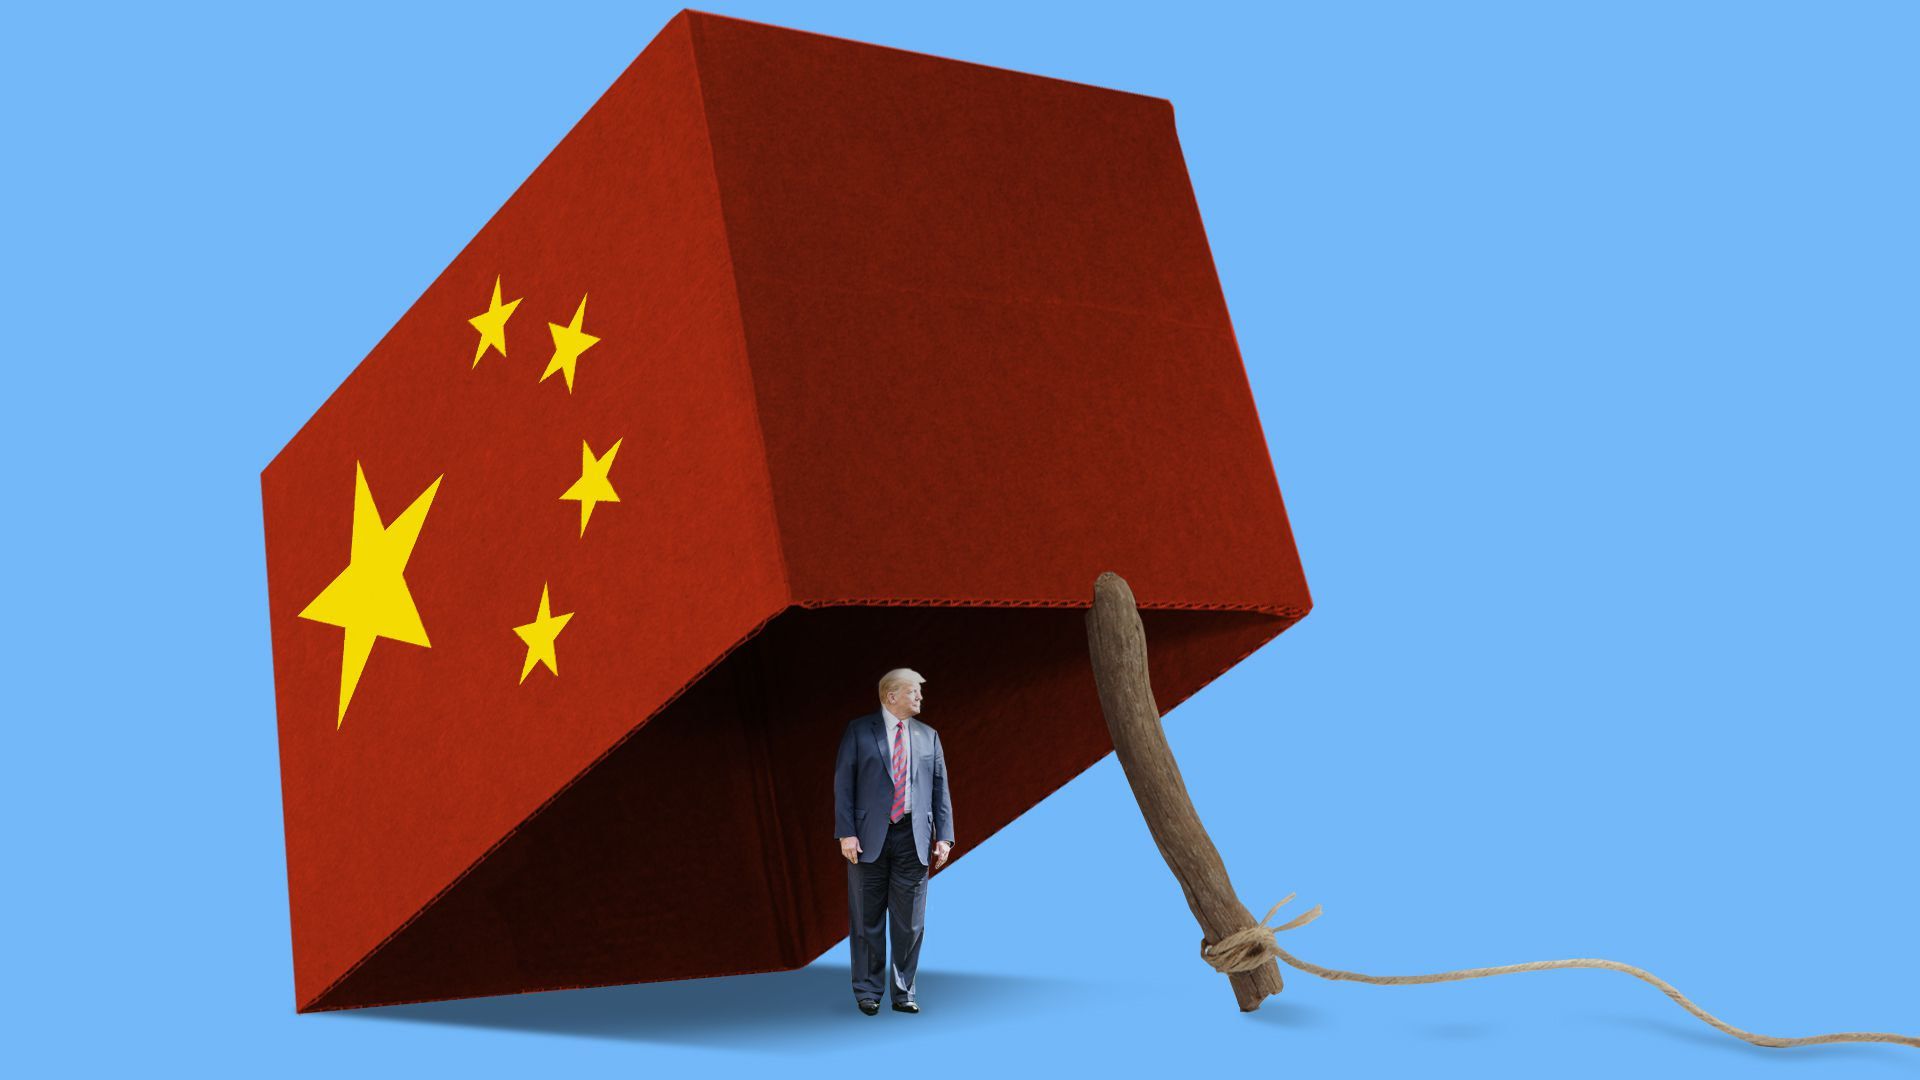 An illustration of Trump standing beneath a Chinese box propped up by a branch